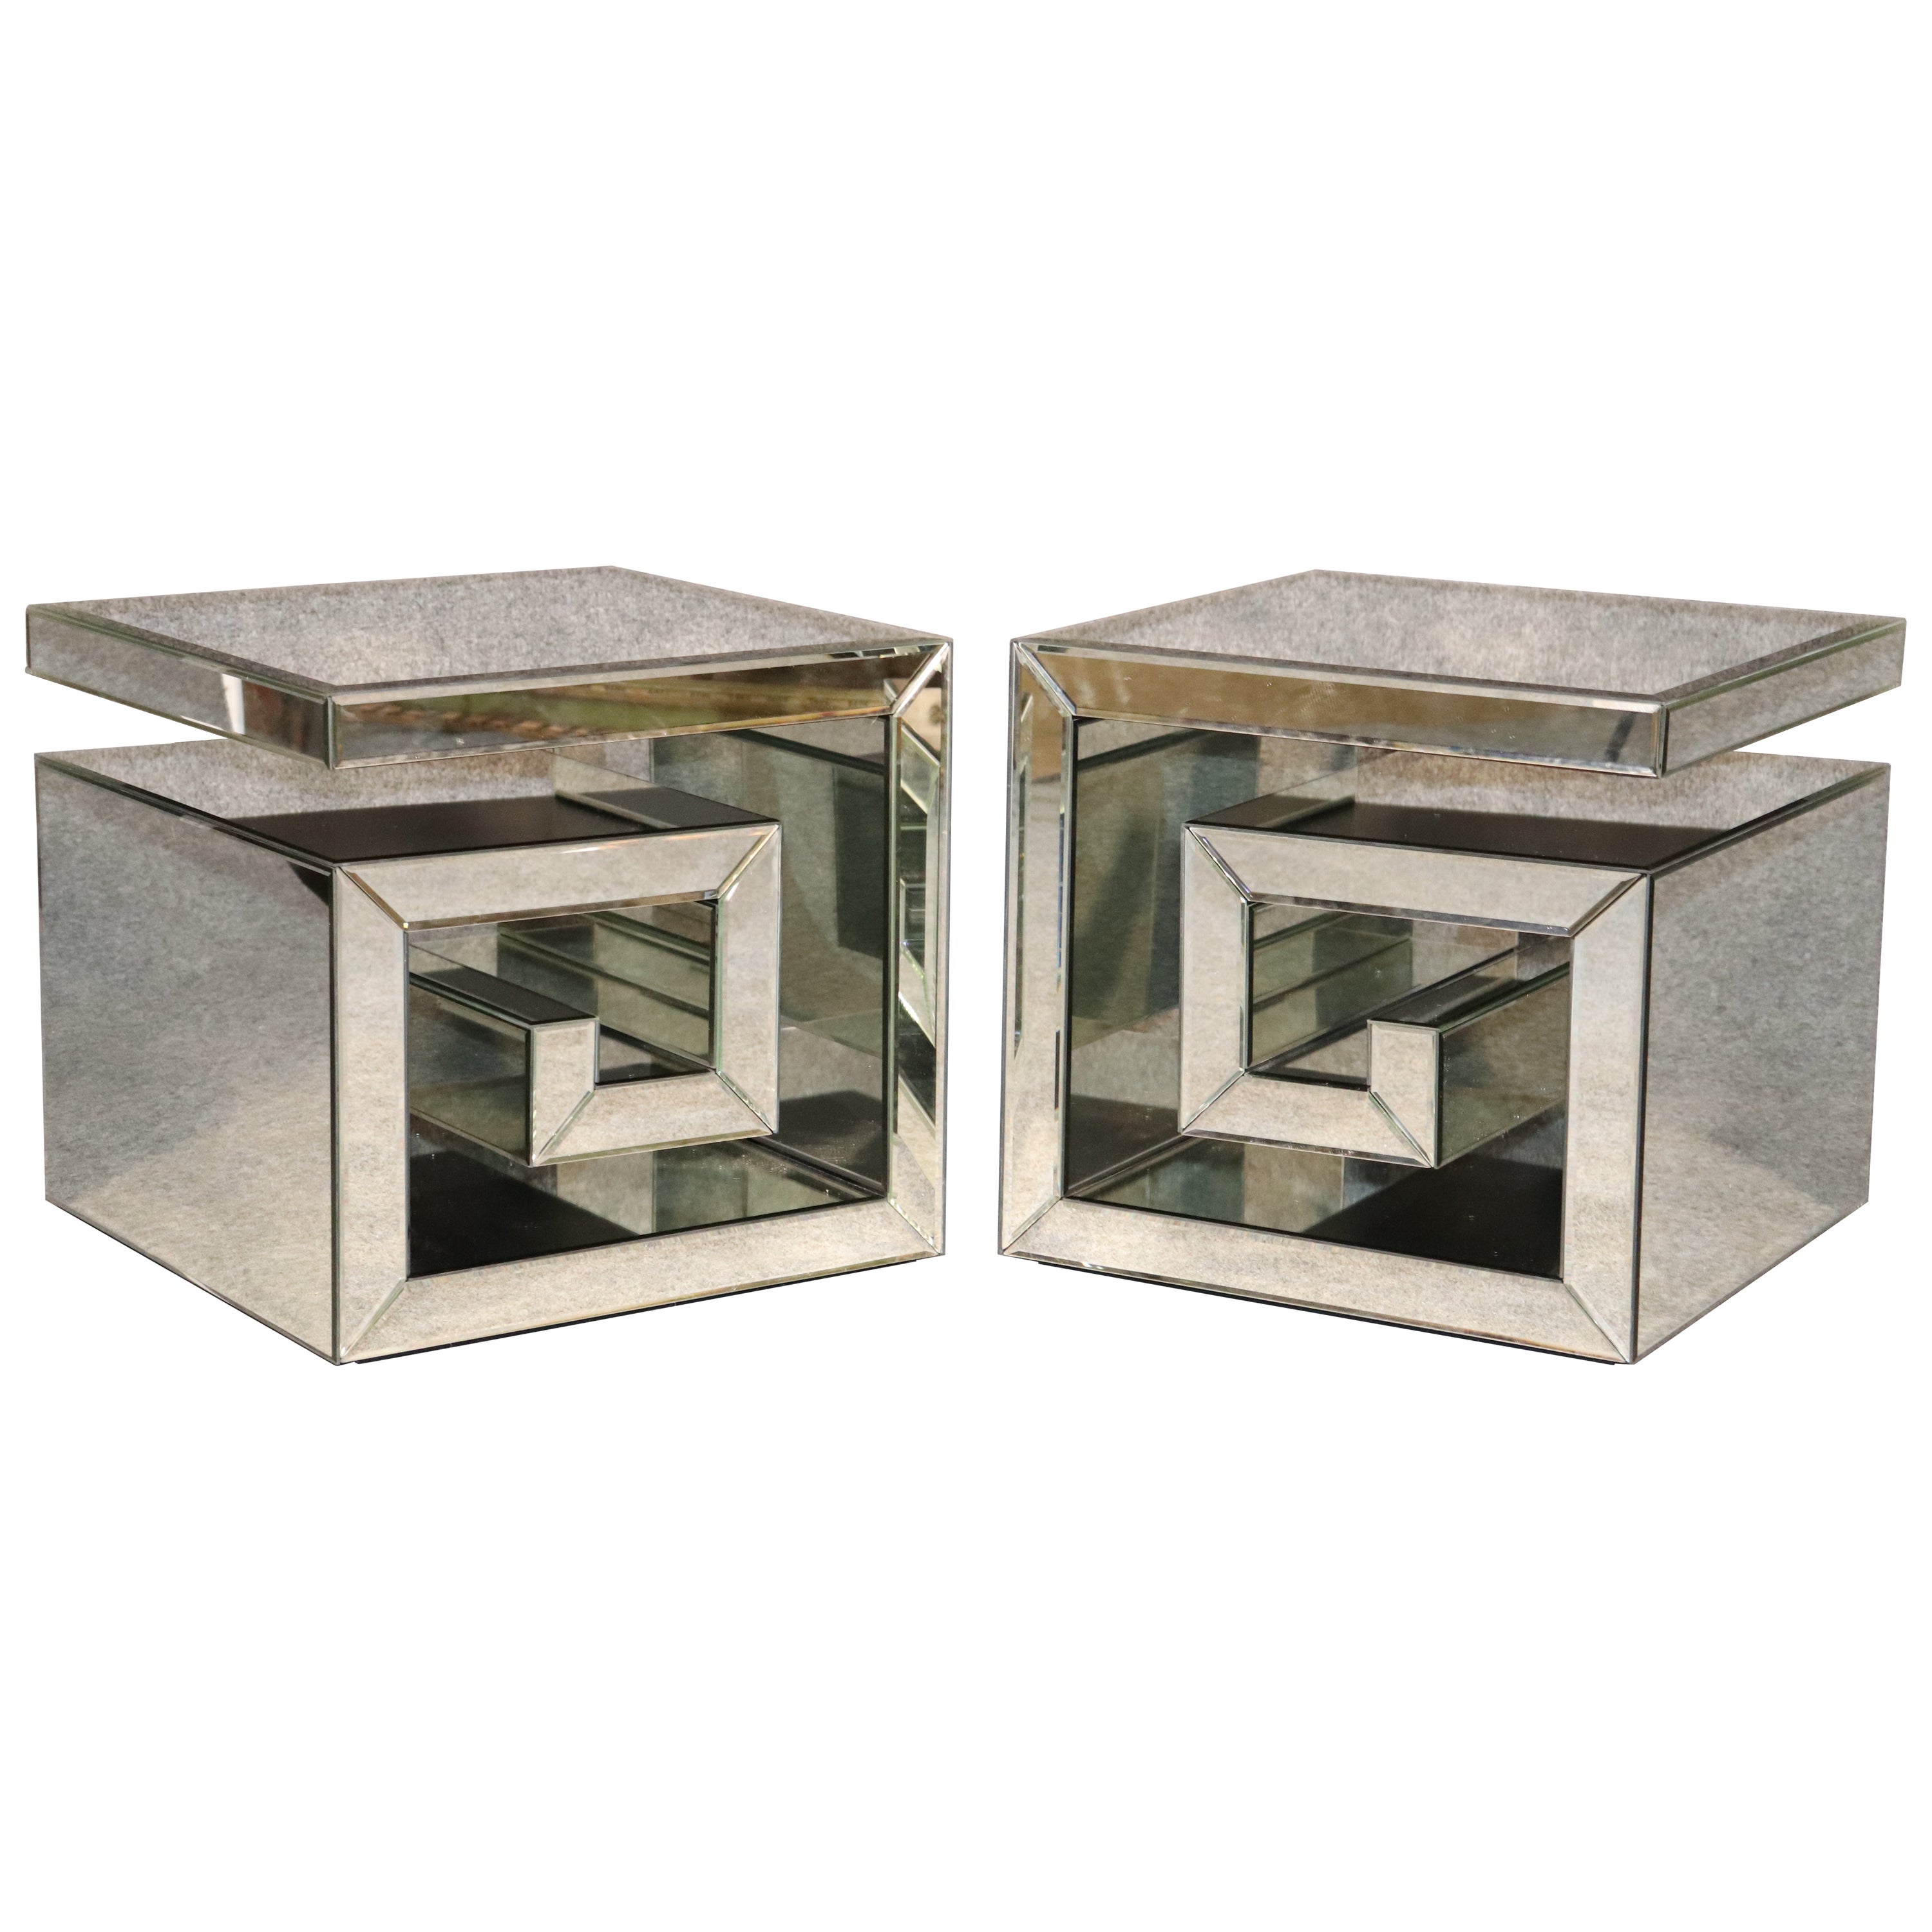 Mirrored Spiral Tables